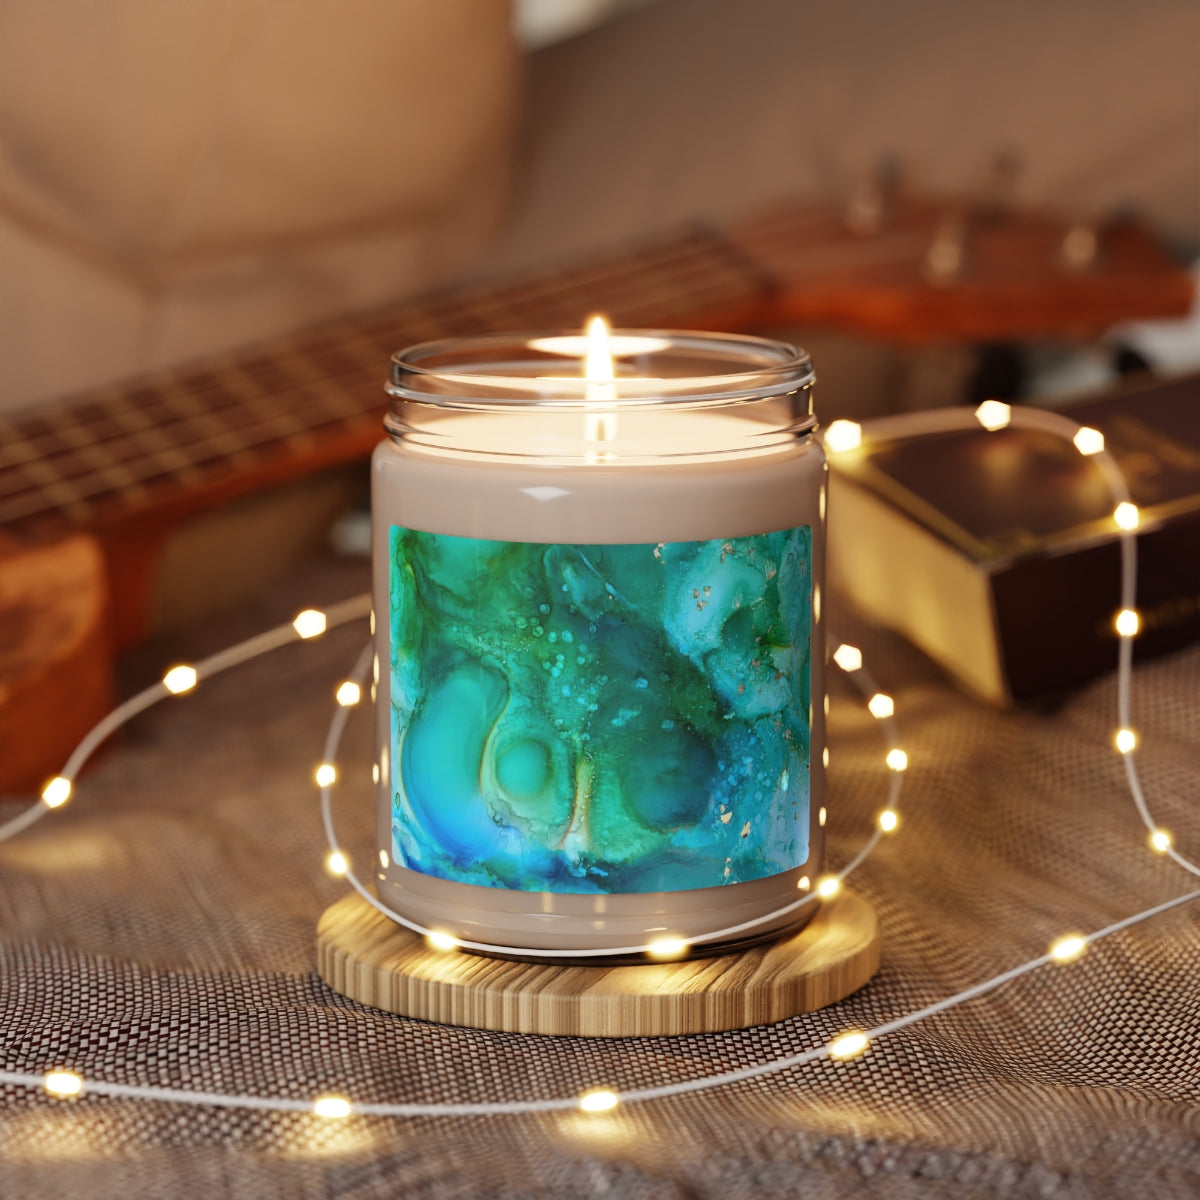 'Coventina' - Celtic Goddess Collection, Scented Candle